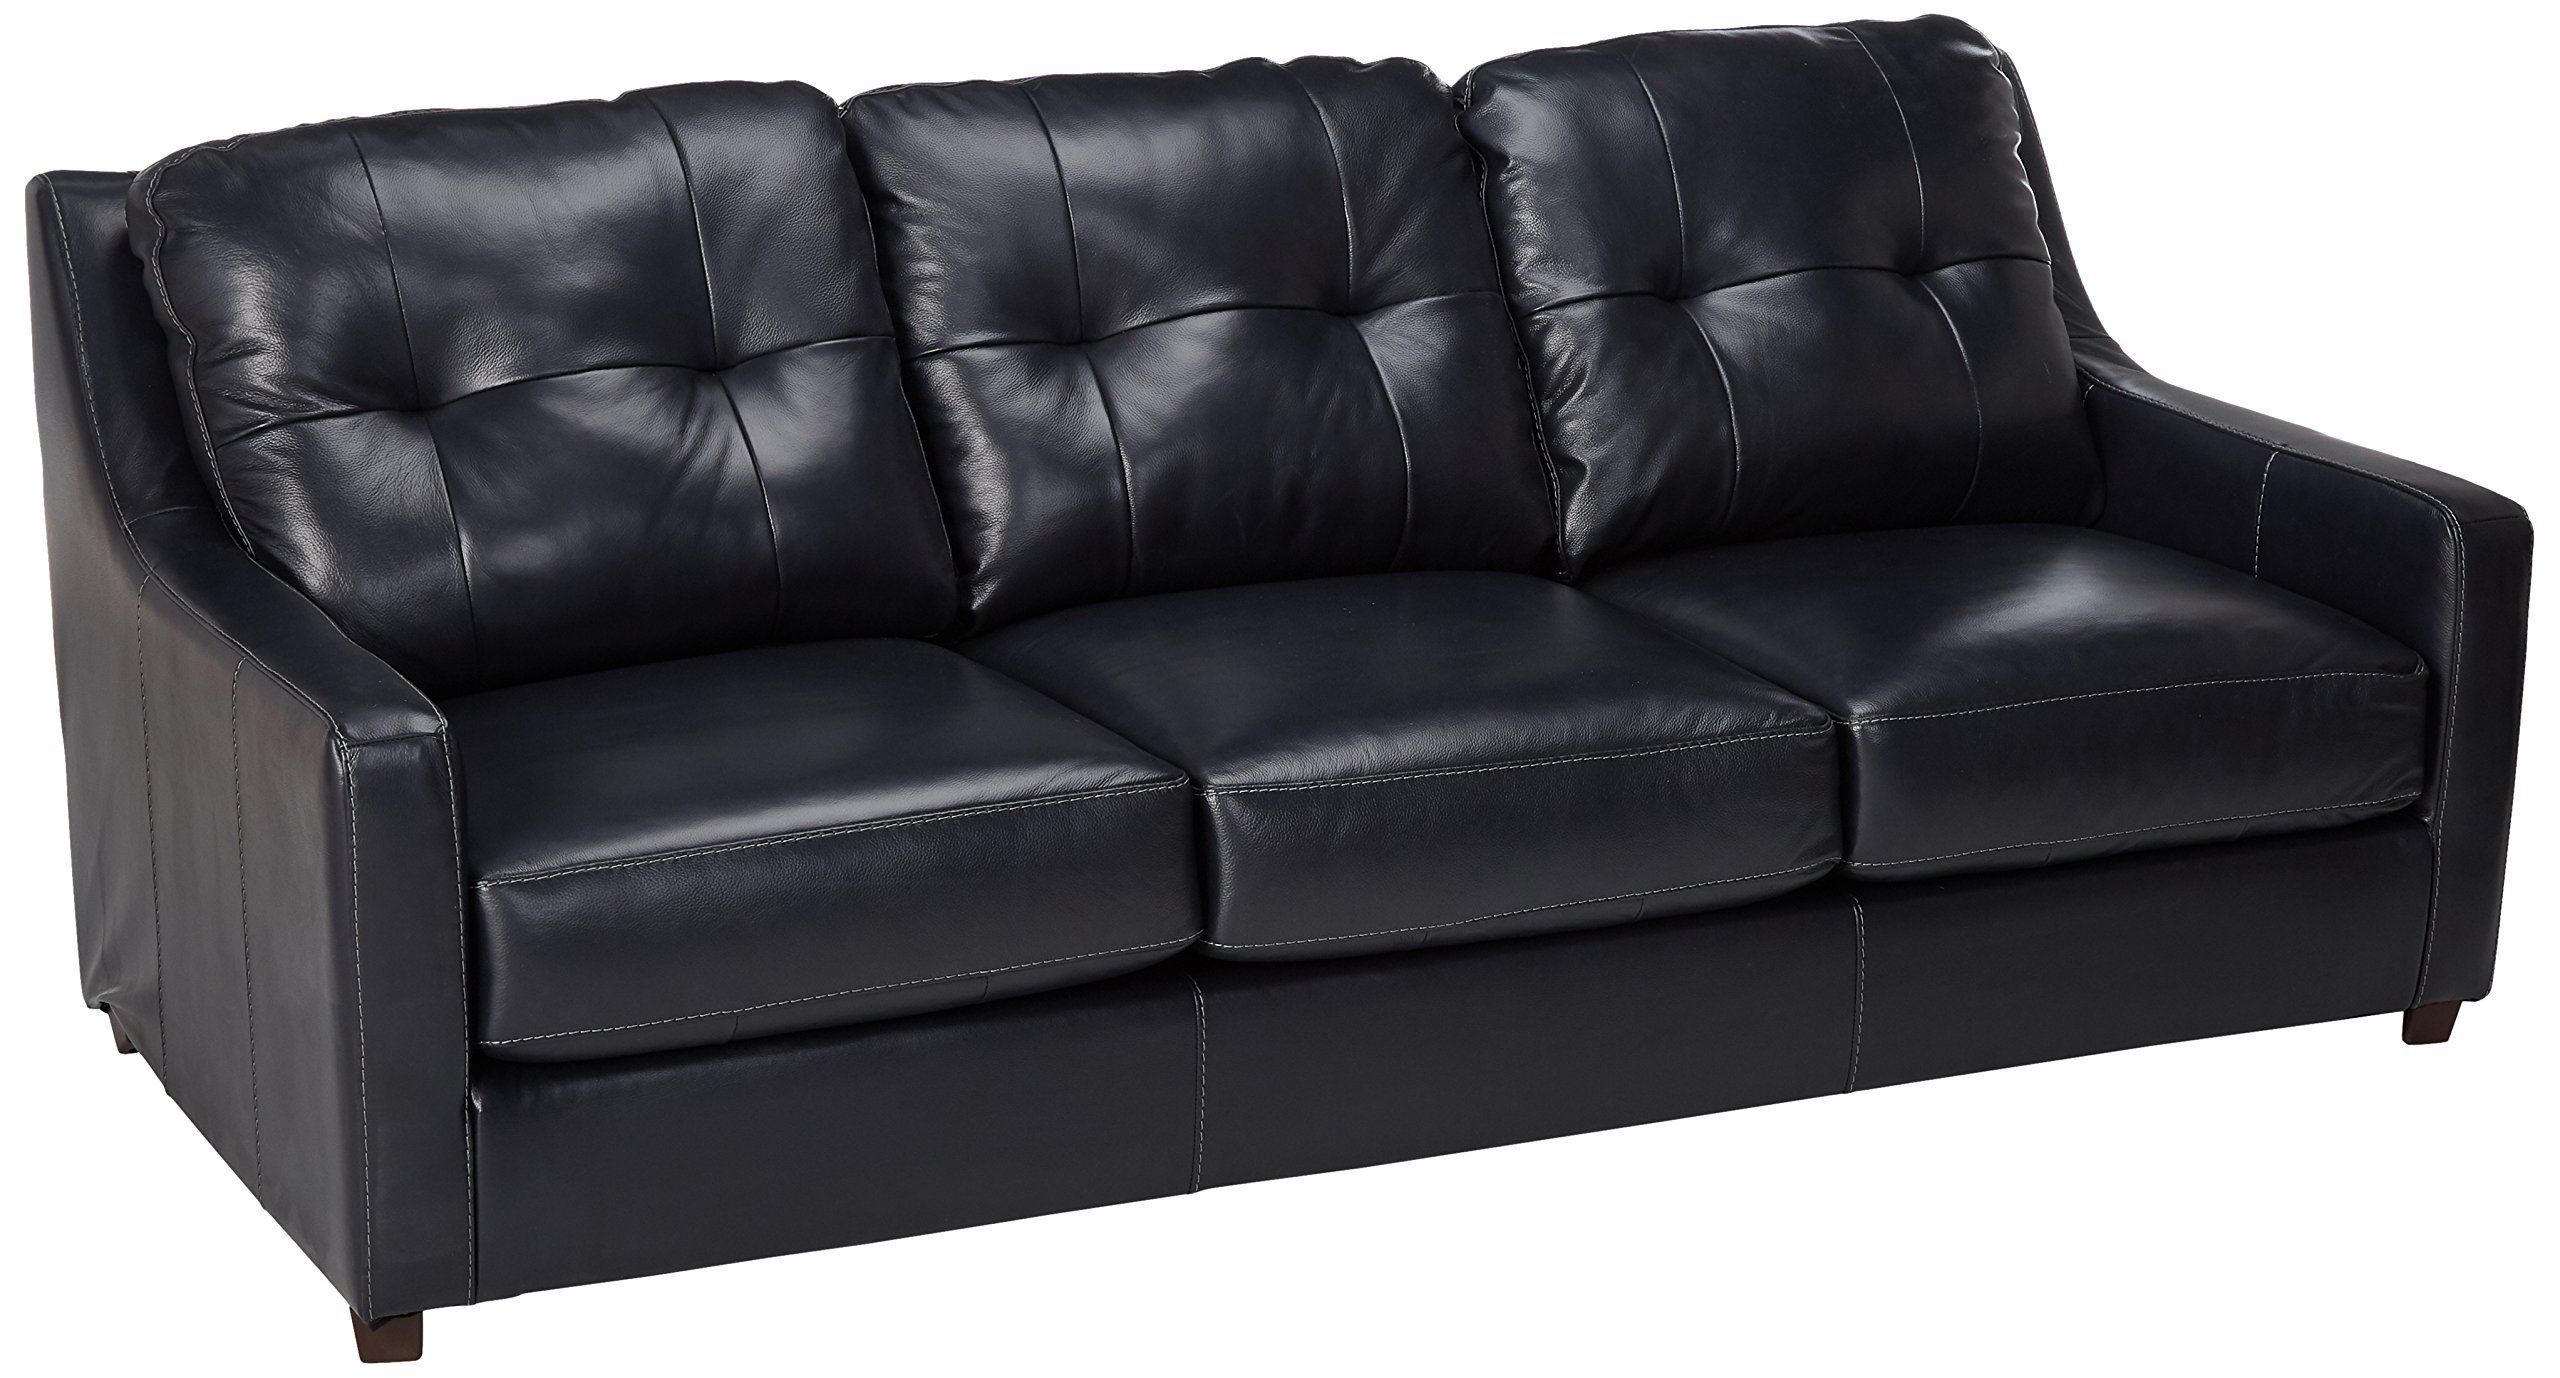 Ashley Furniture Signature Design Okean Upholstered Leather Queen With Regard To Navy Sleeper Sofa Couches (View 6 of 20)